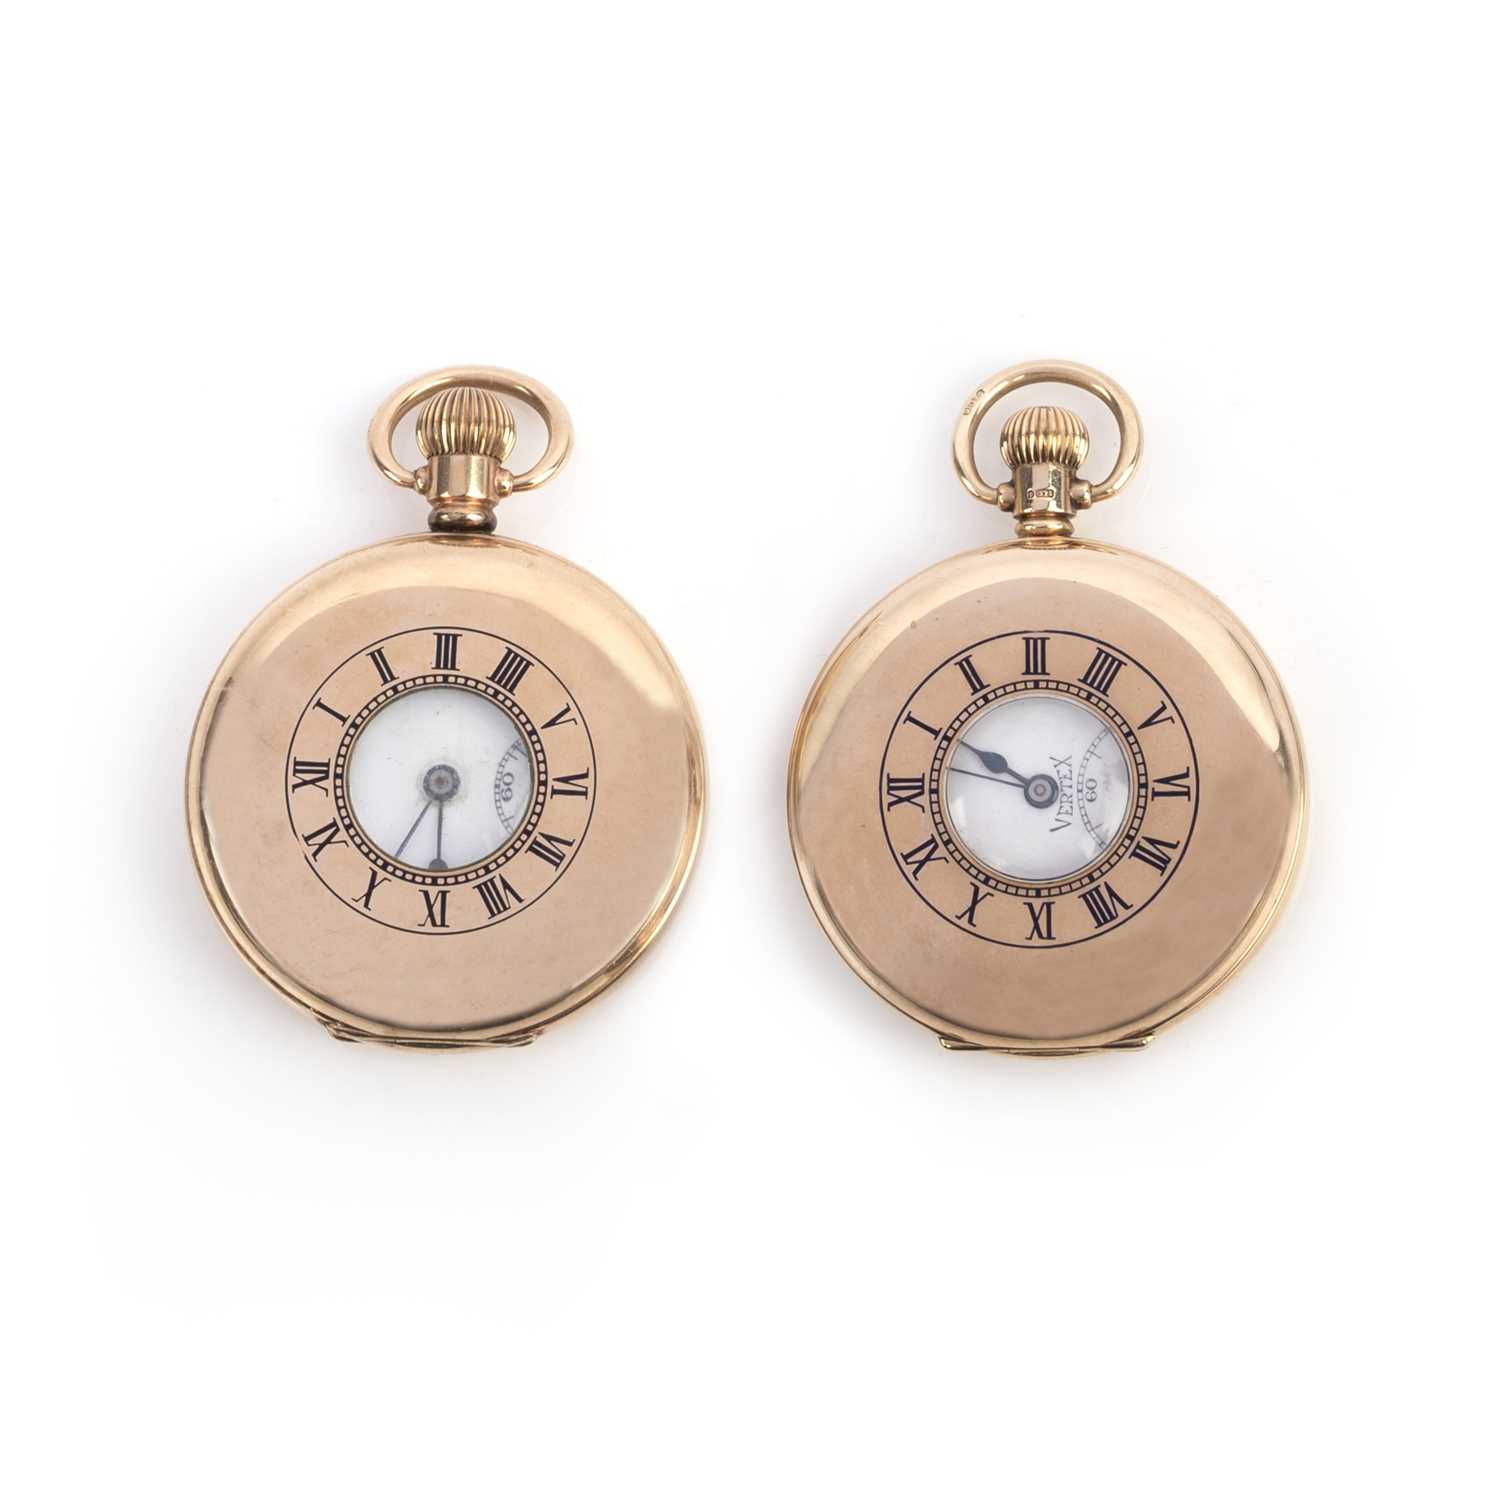 Two pocket watches, comprising: a 9ct gold half hunter pocket watch by Vertex, length 6.8cm